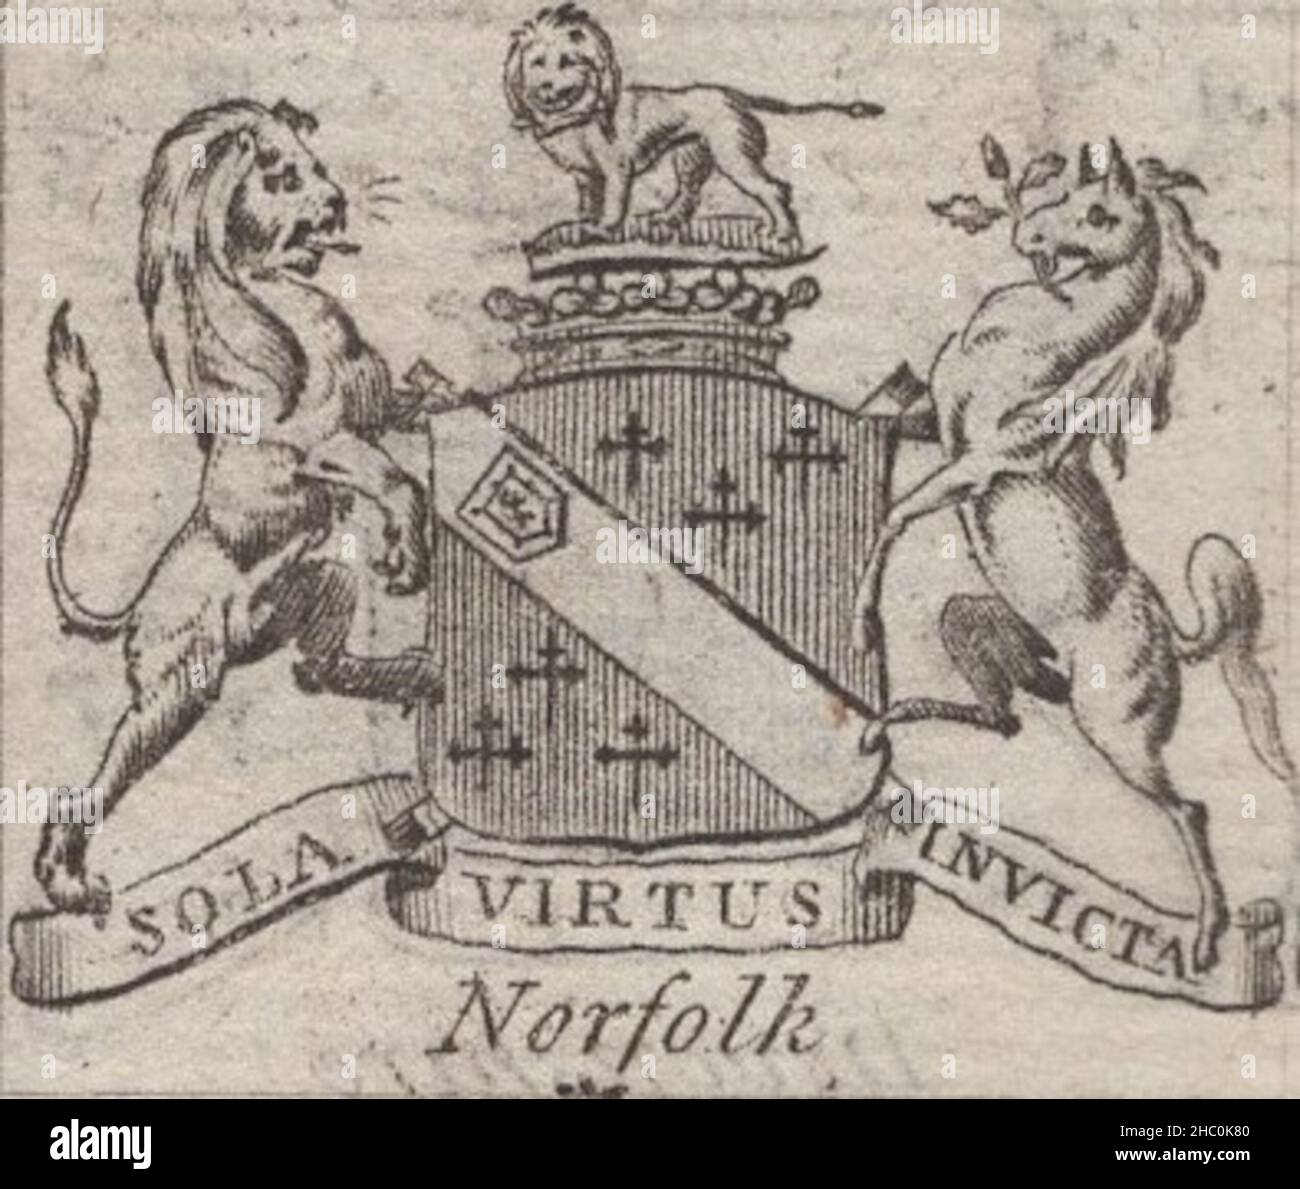 antique 18th century engraving heraldy coat of arms, English Duke , Motto / slogen: Sola Virtus Invicta. Norfolk. by Woodman & Mutlow fc russel co circa 1780s Source: original engravings from  the annual almanach book. Stock Photo